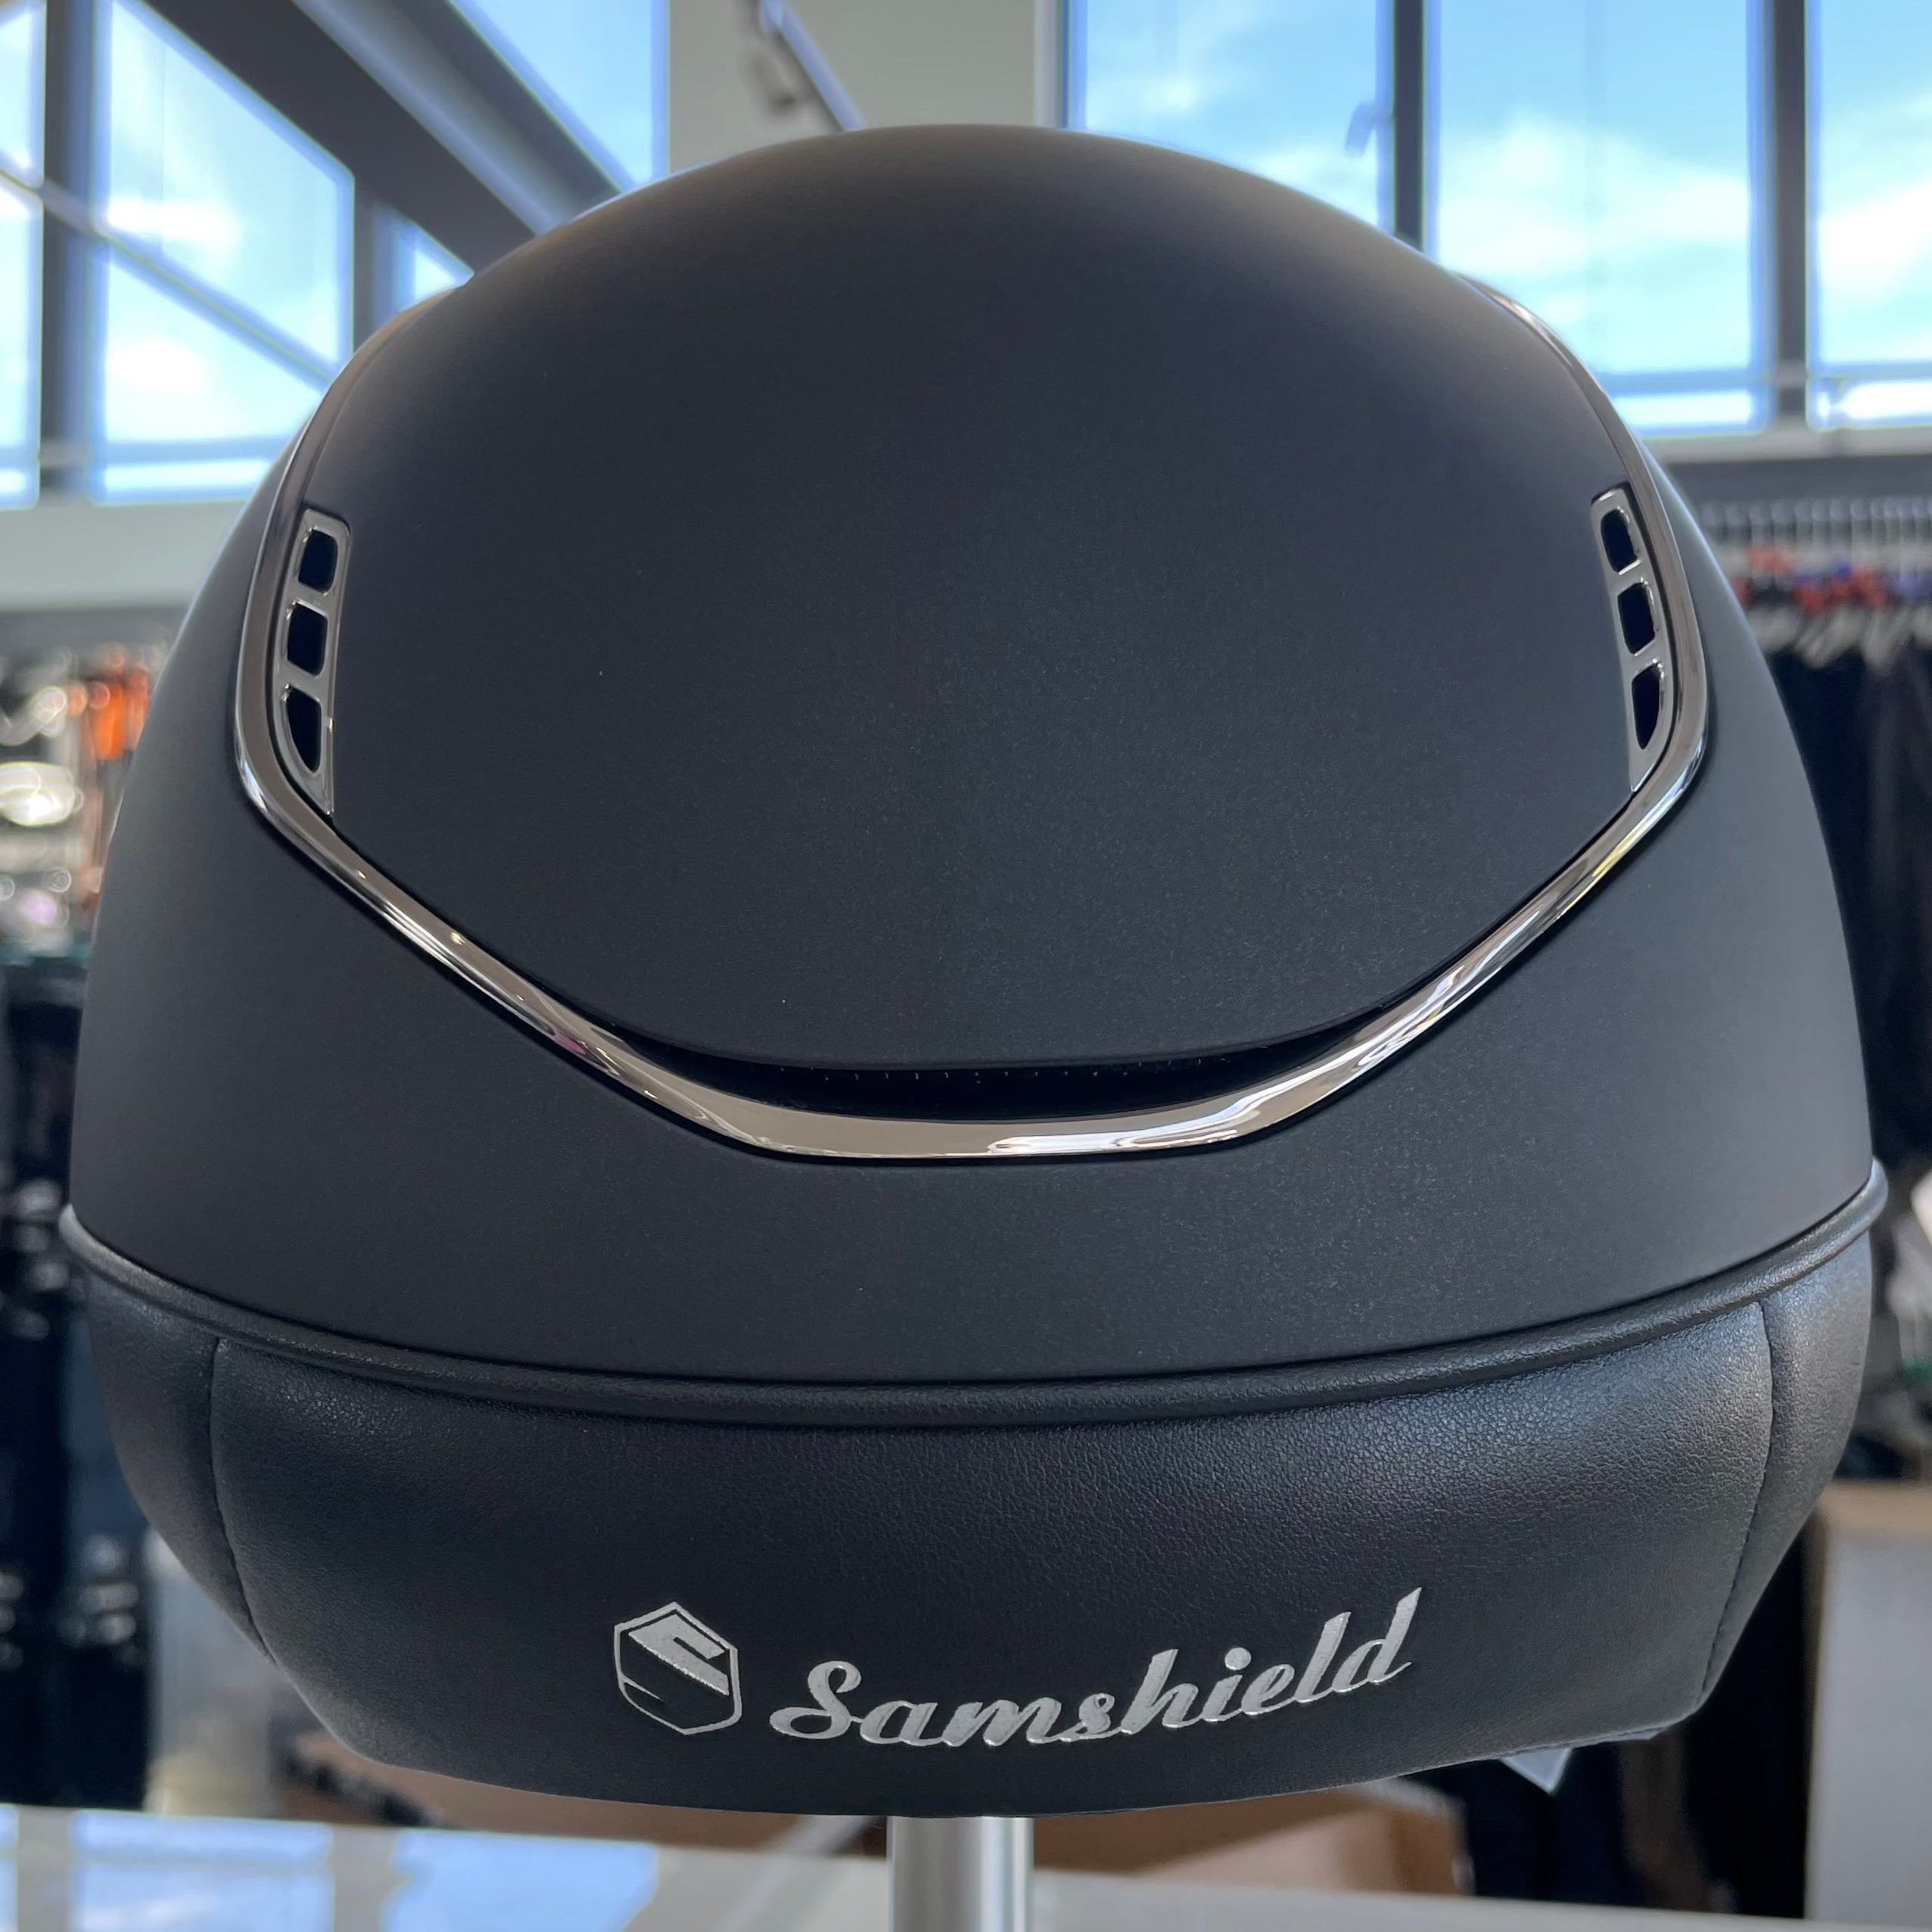 Samshield MissShield 2.0 Black with Black chrome and 5 front swarovski crystals L- in stock and ready to ship!